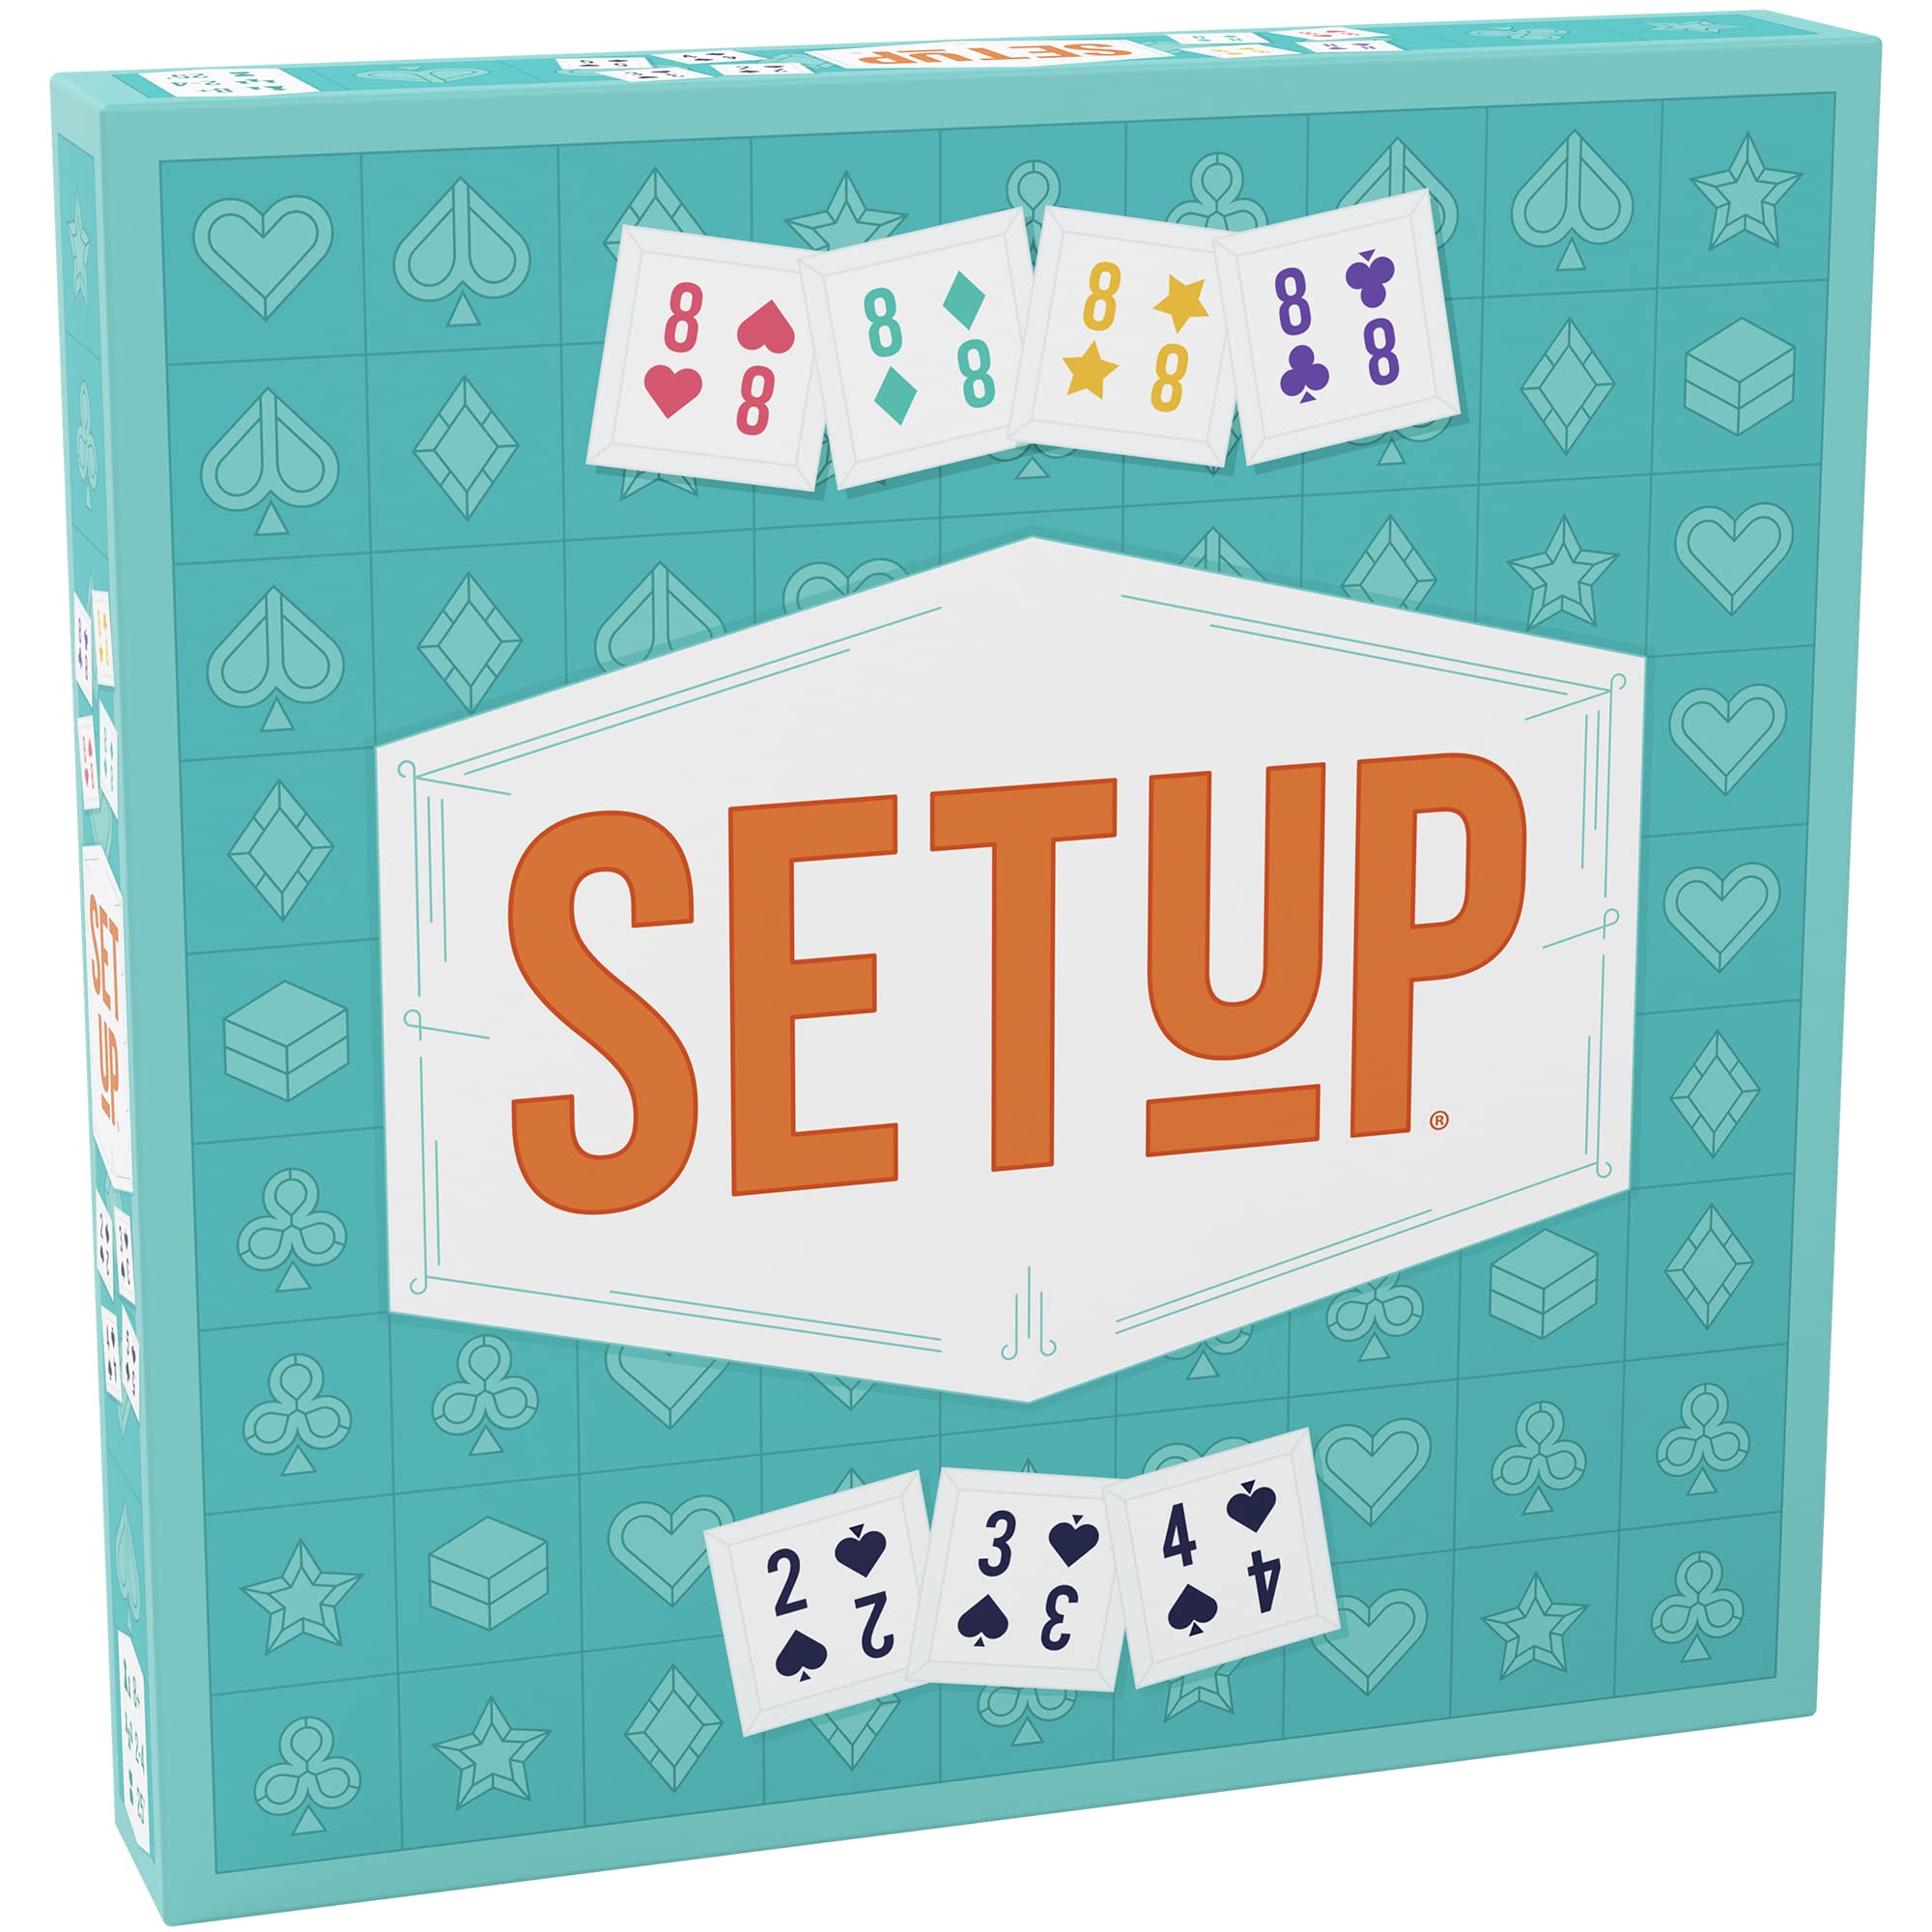 Setup Board Game | Fun Family Game for Game Night | Rummy Style Strategy Game for Kids and Adults | Cooperative Game | Ages 8+ | 2-4 Players | Average Playtime 25 Minutes | Made by Bezzerwizzer